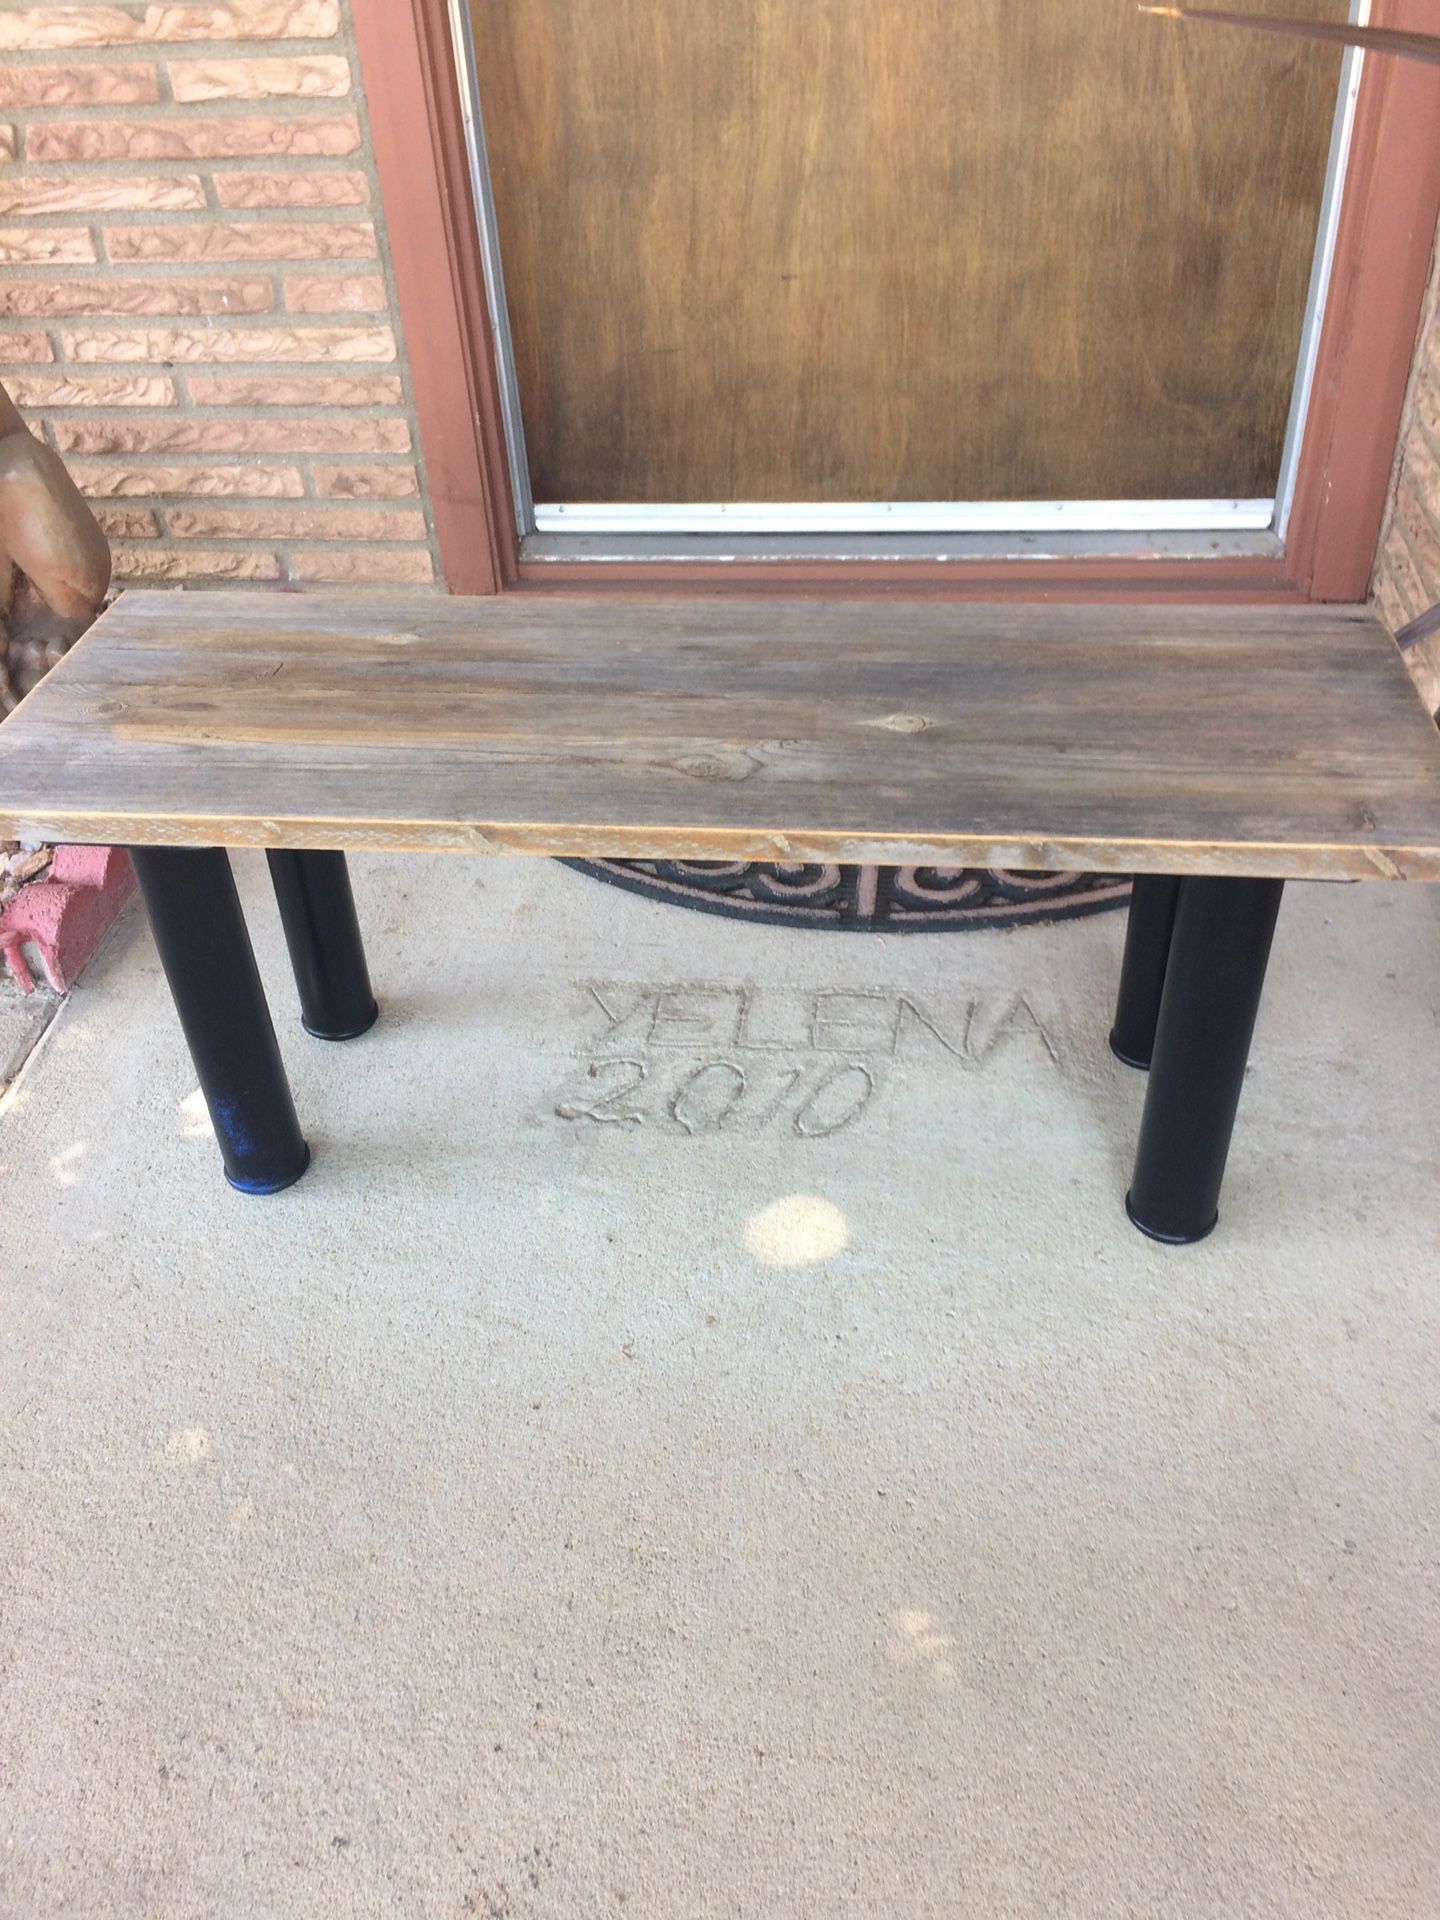 BENCH - 35x12x15” h. RUSTIC WOOD TOP - BLACK IRON LEGS. Pick up in Escondido $34.00